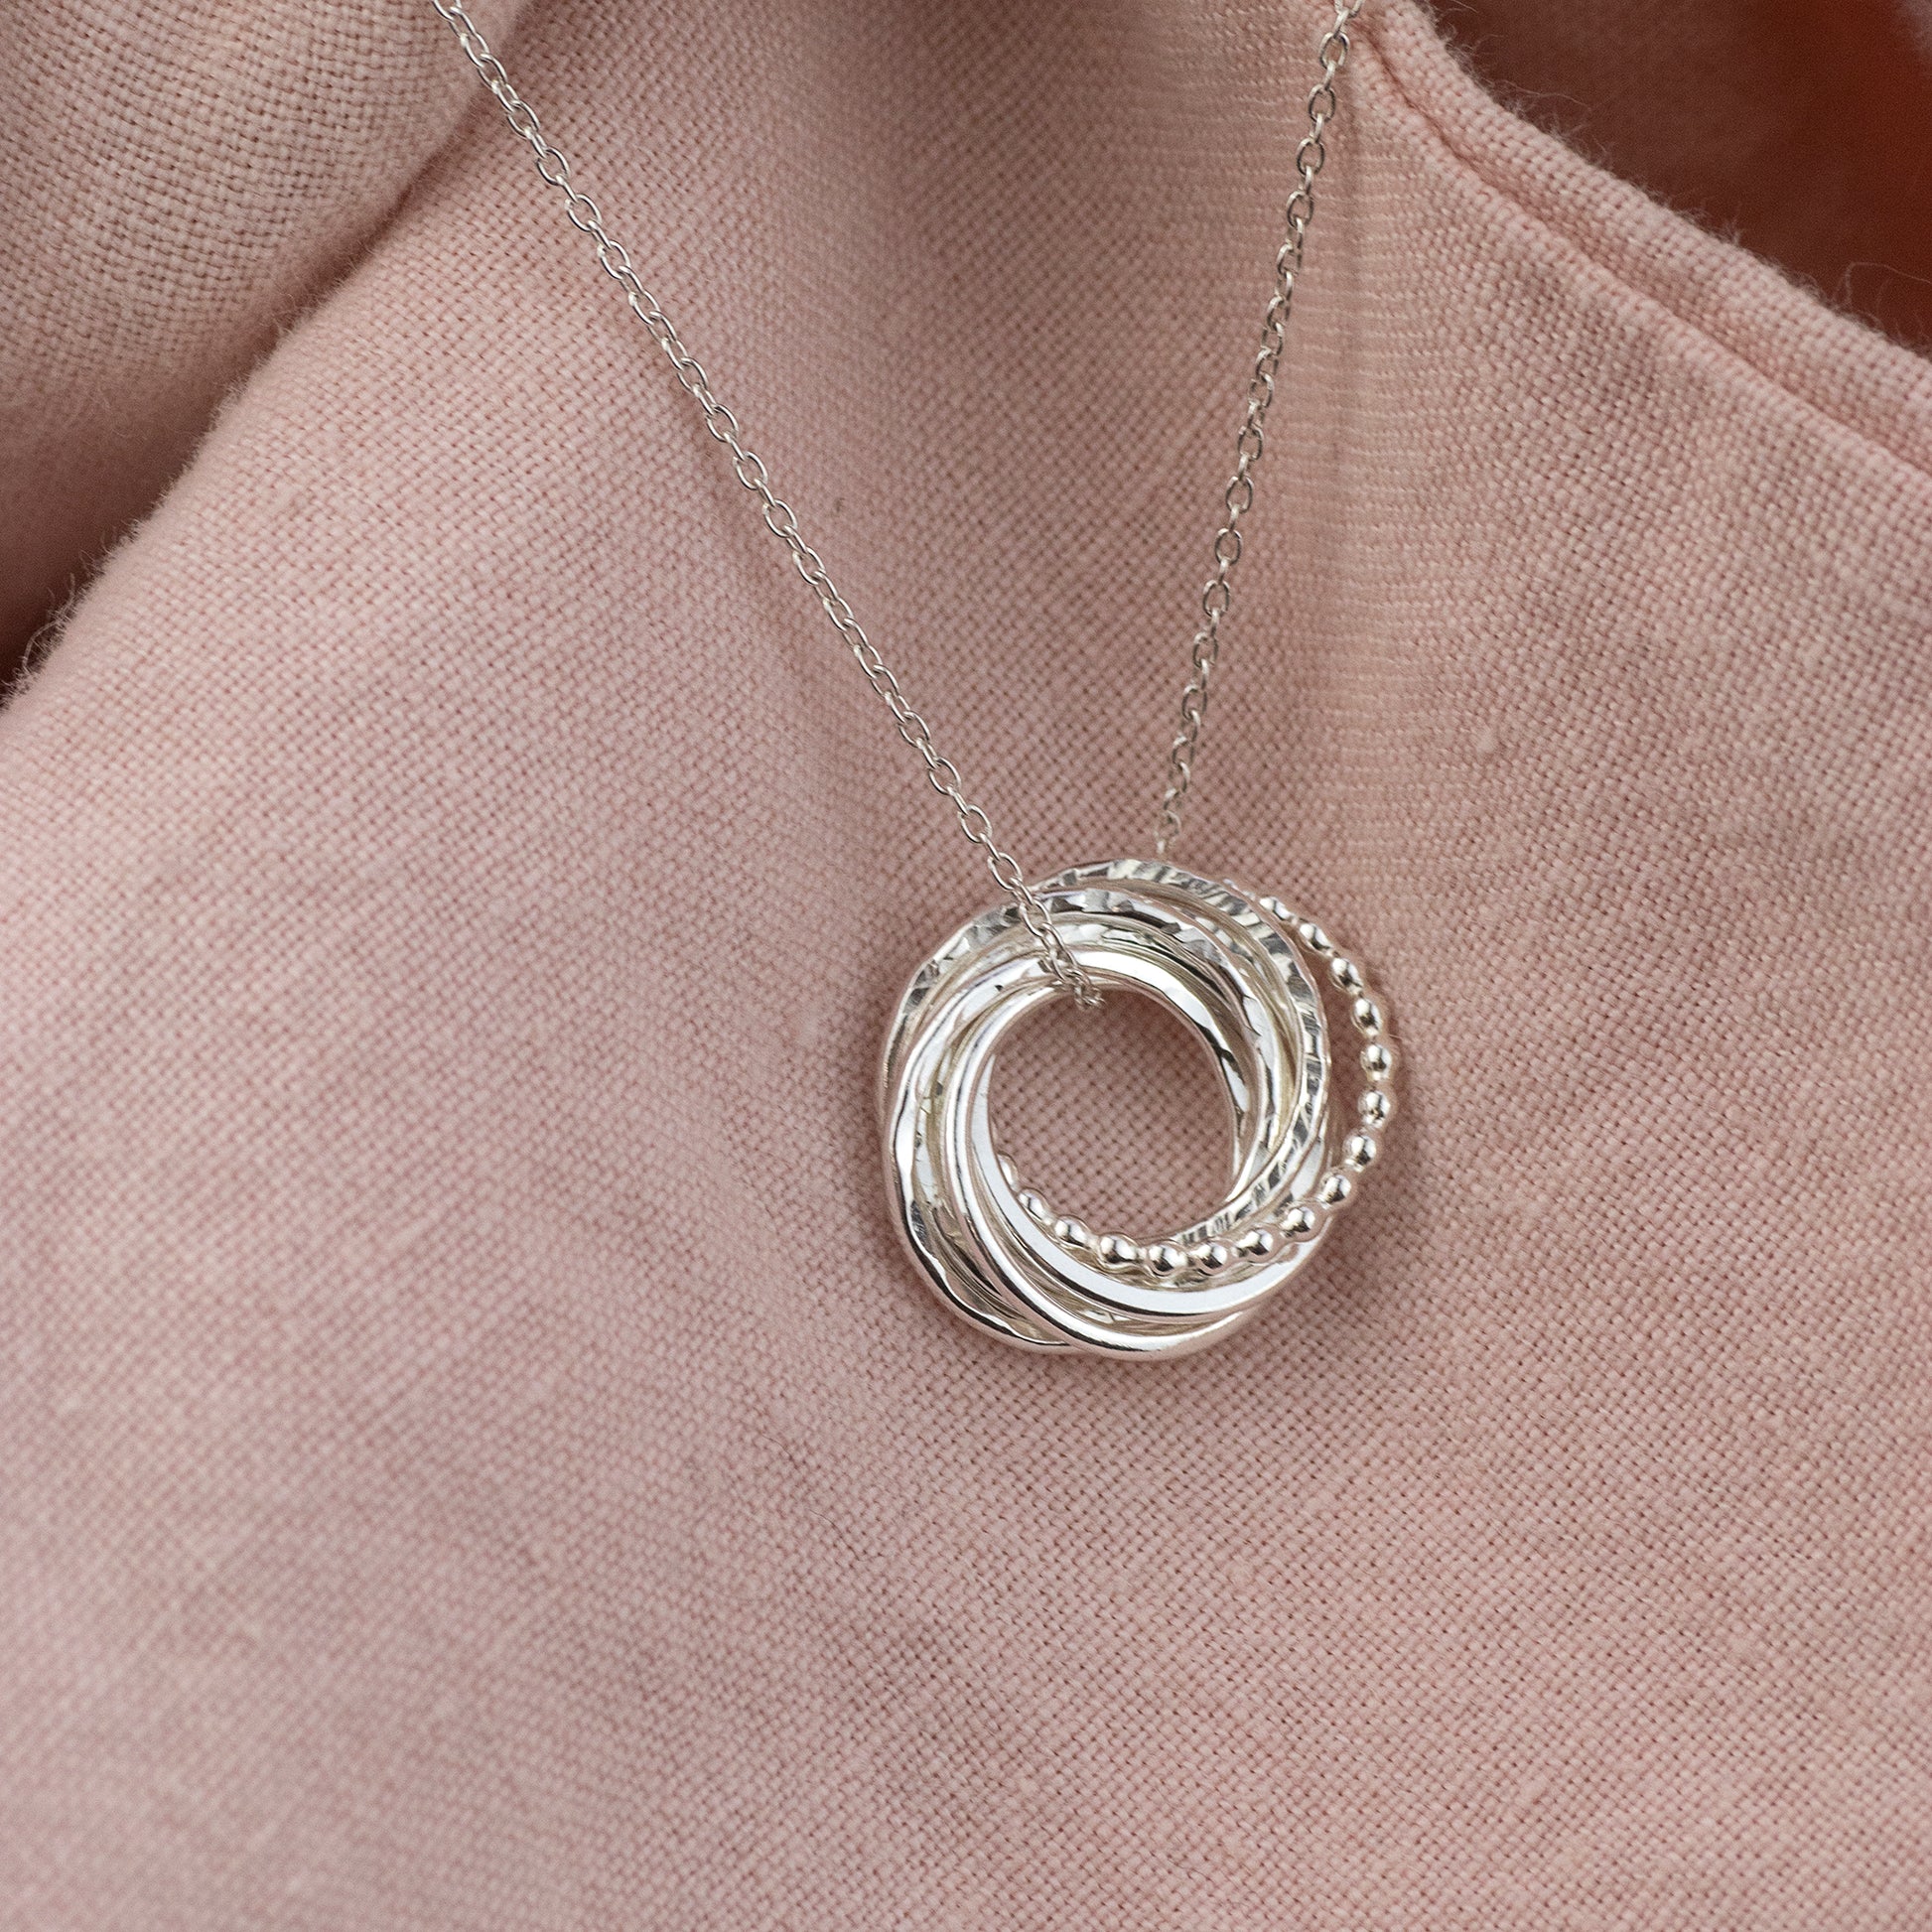 8th Anniversary Necklace - The Original 8 Rings for 8 Years Necklace - Petite Silver